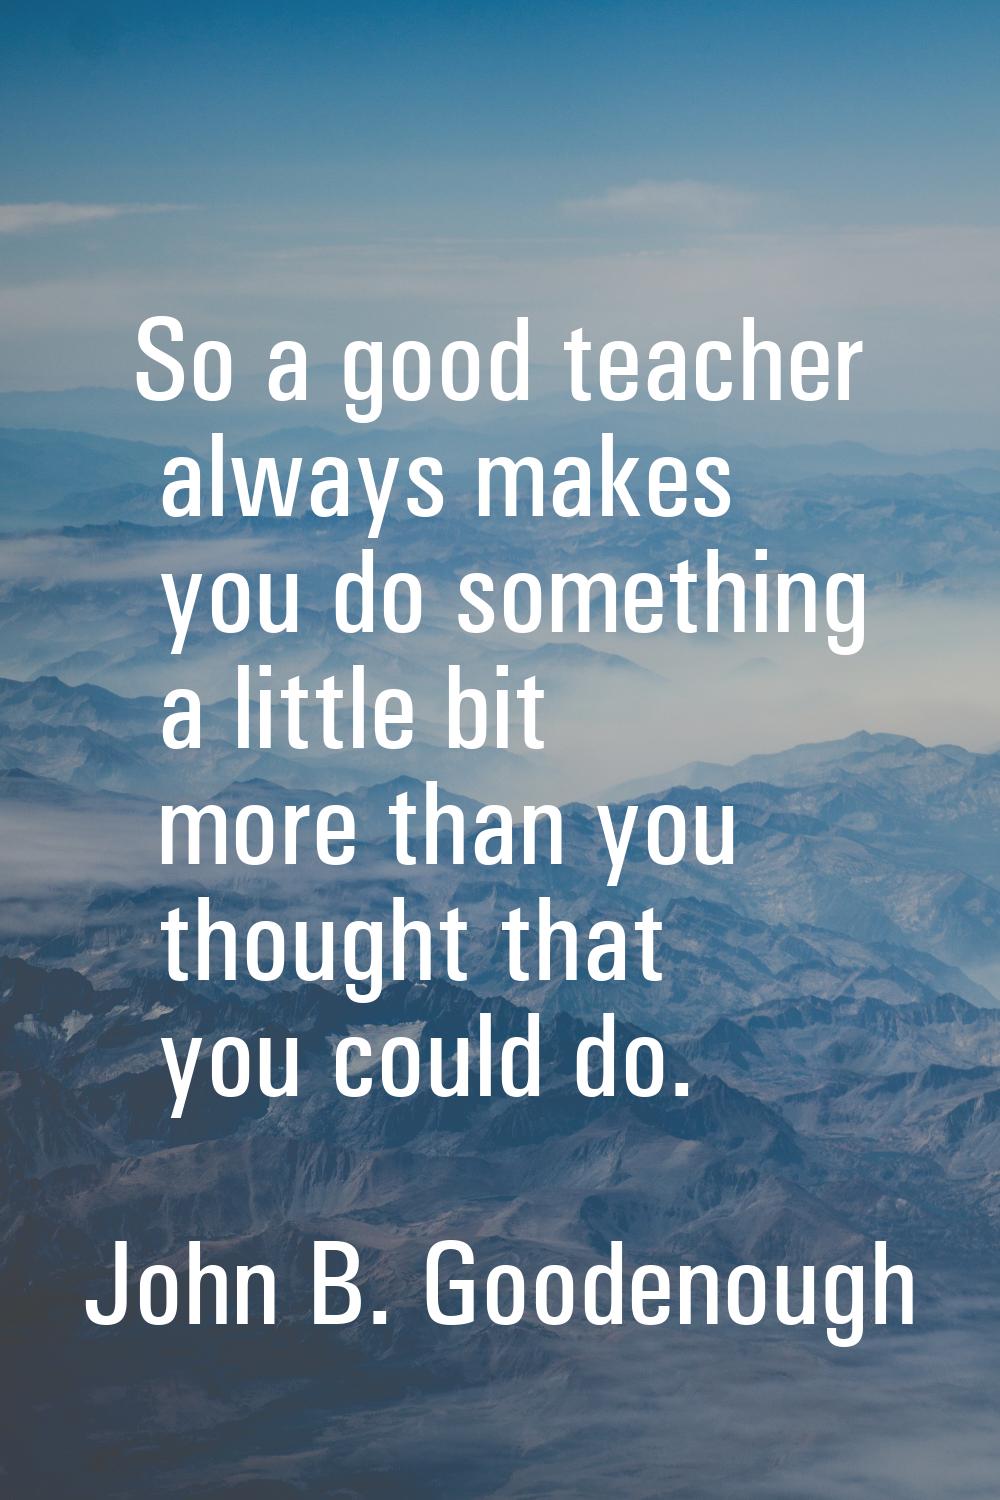 So a good teacher always makes you do something a little bit more than you thought that you could d